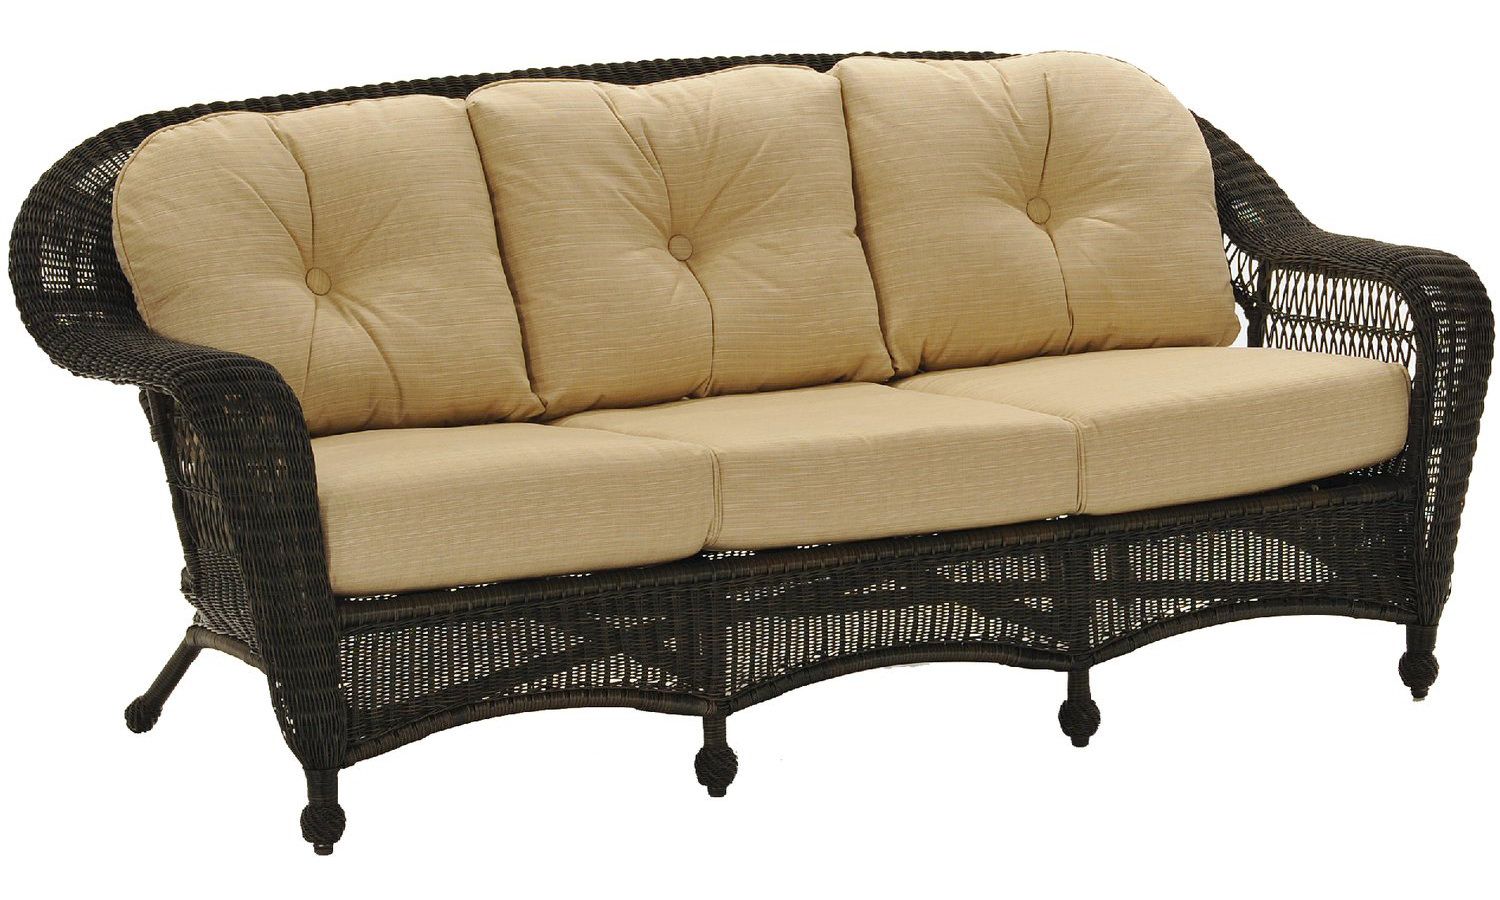 Wicker Sofa Bed Cancun Palm Upholstered Rattan Wicker Sofa Intended For Charleston Sofas (View 13 of 15)